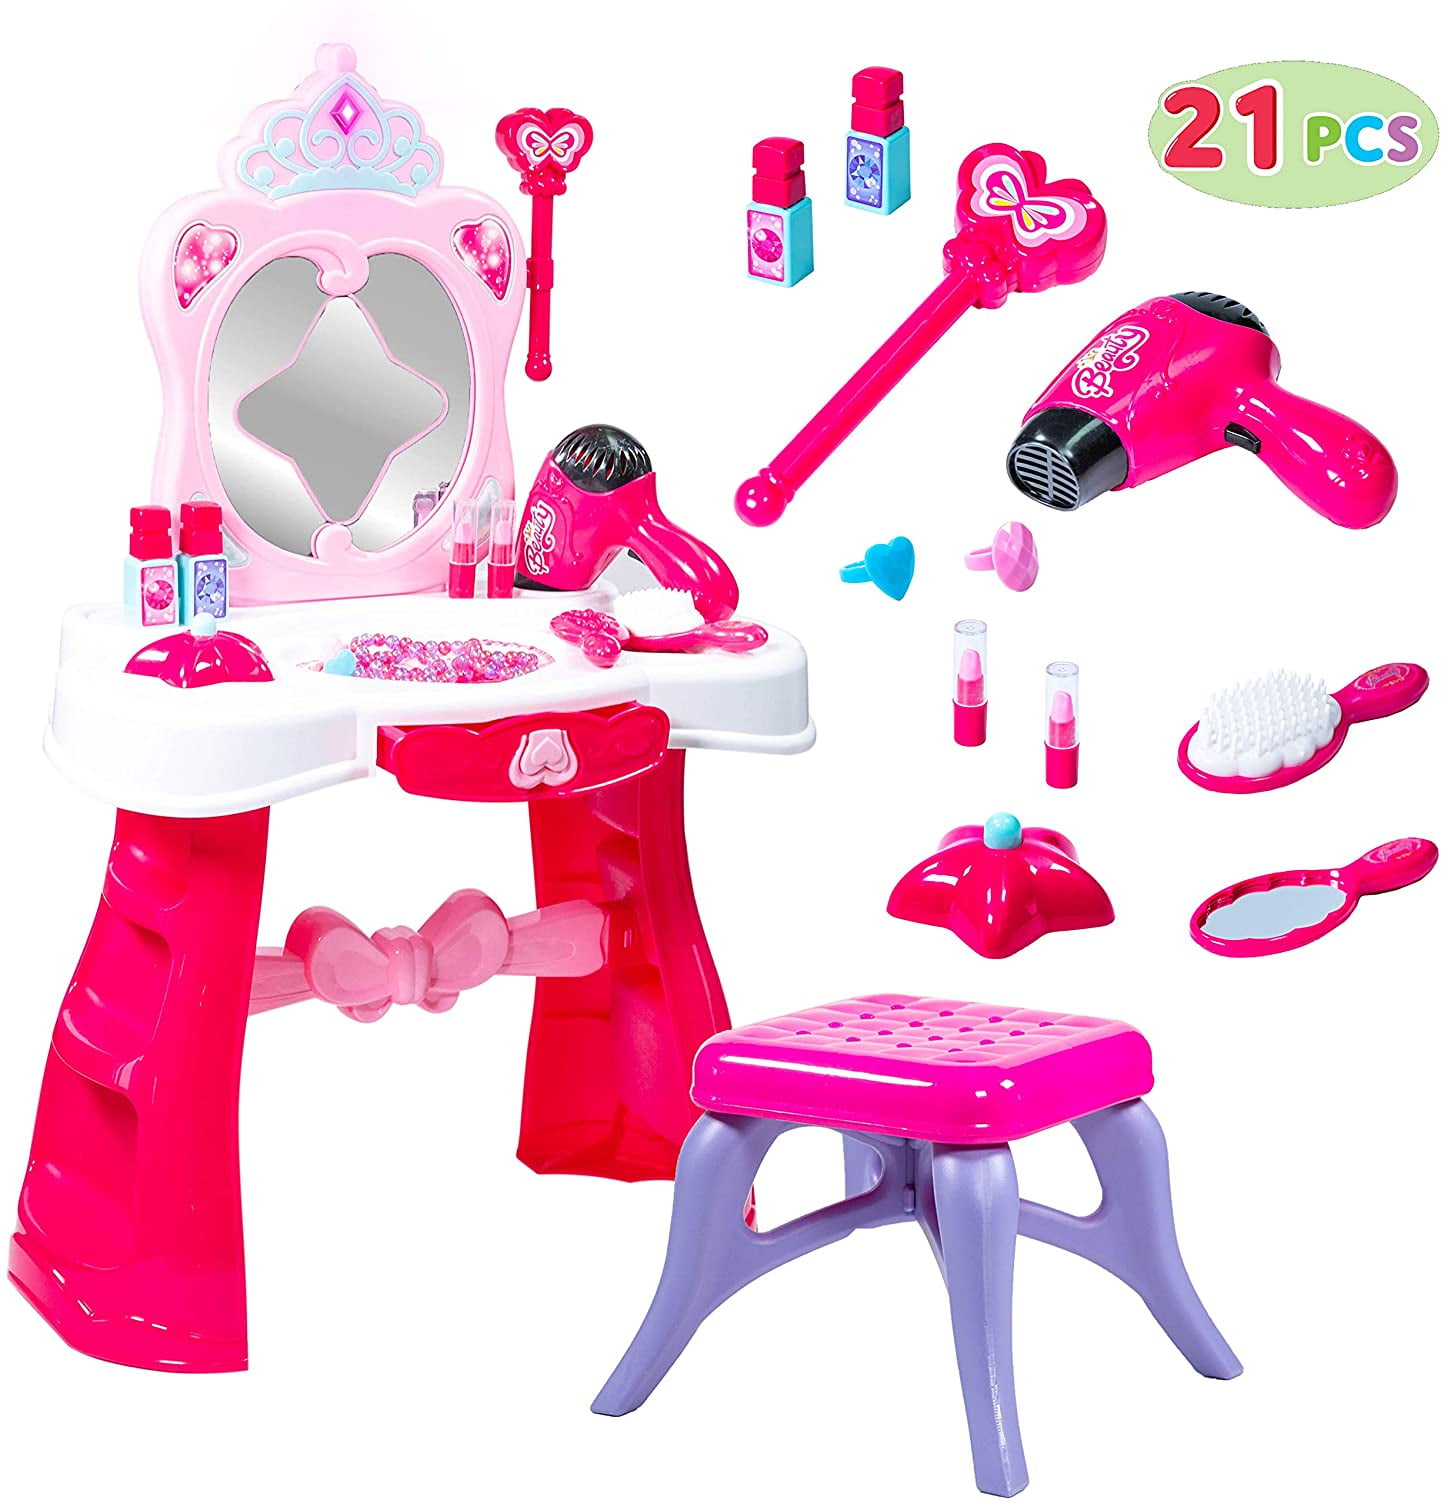 Pretend Play Vanity Table Dressing Table Play Set with Lights Sounds Chair and Fashion Makeup Accessories Makeup Table for Kids Litter Girl